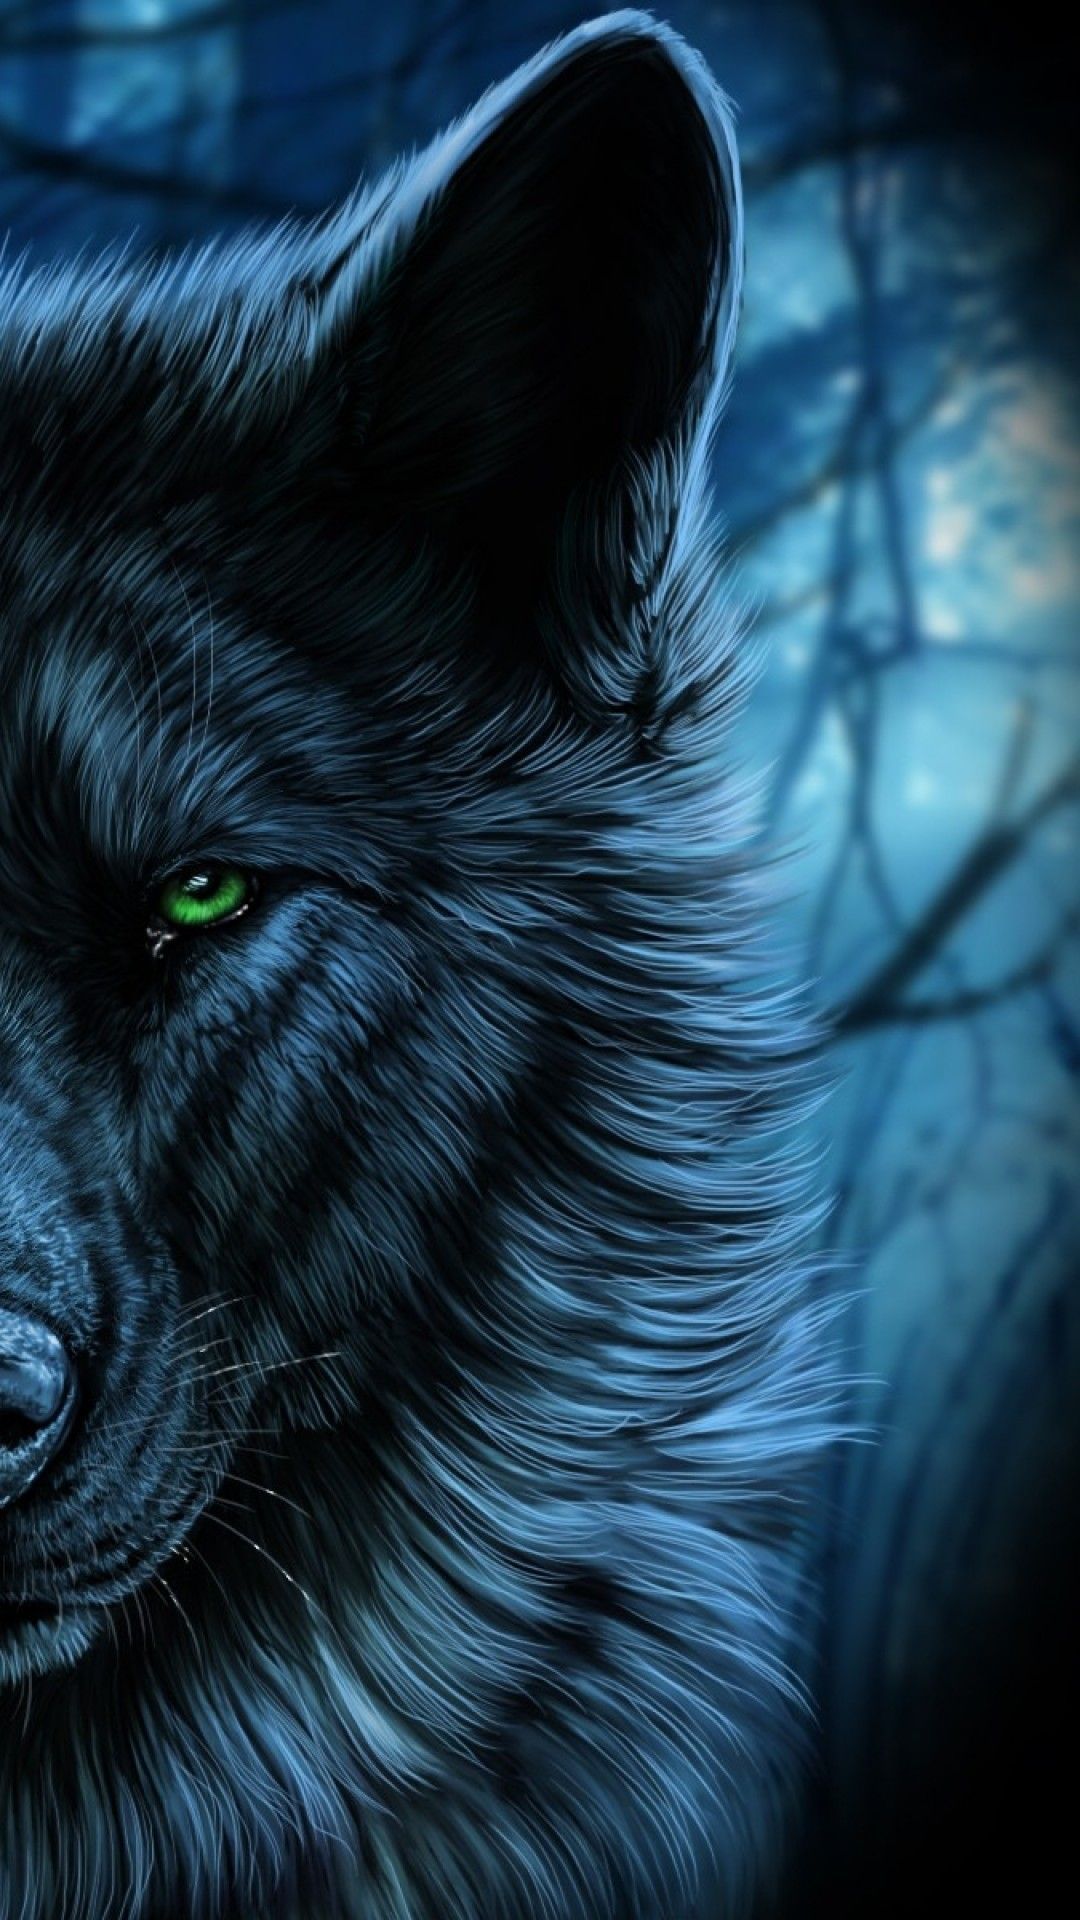 Awesome Wolf iPhone Wallpaper Free Awesome Wolf iPhone